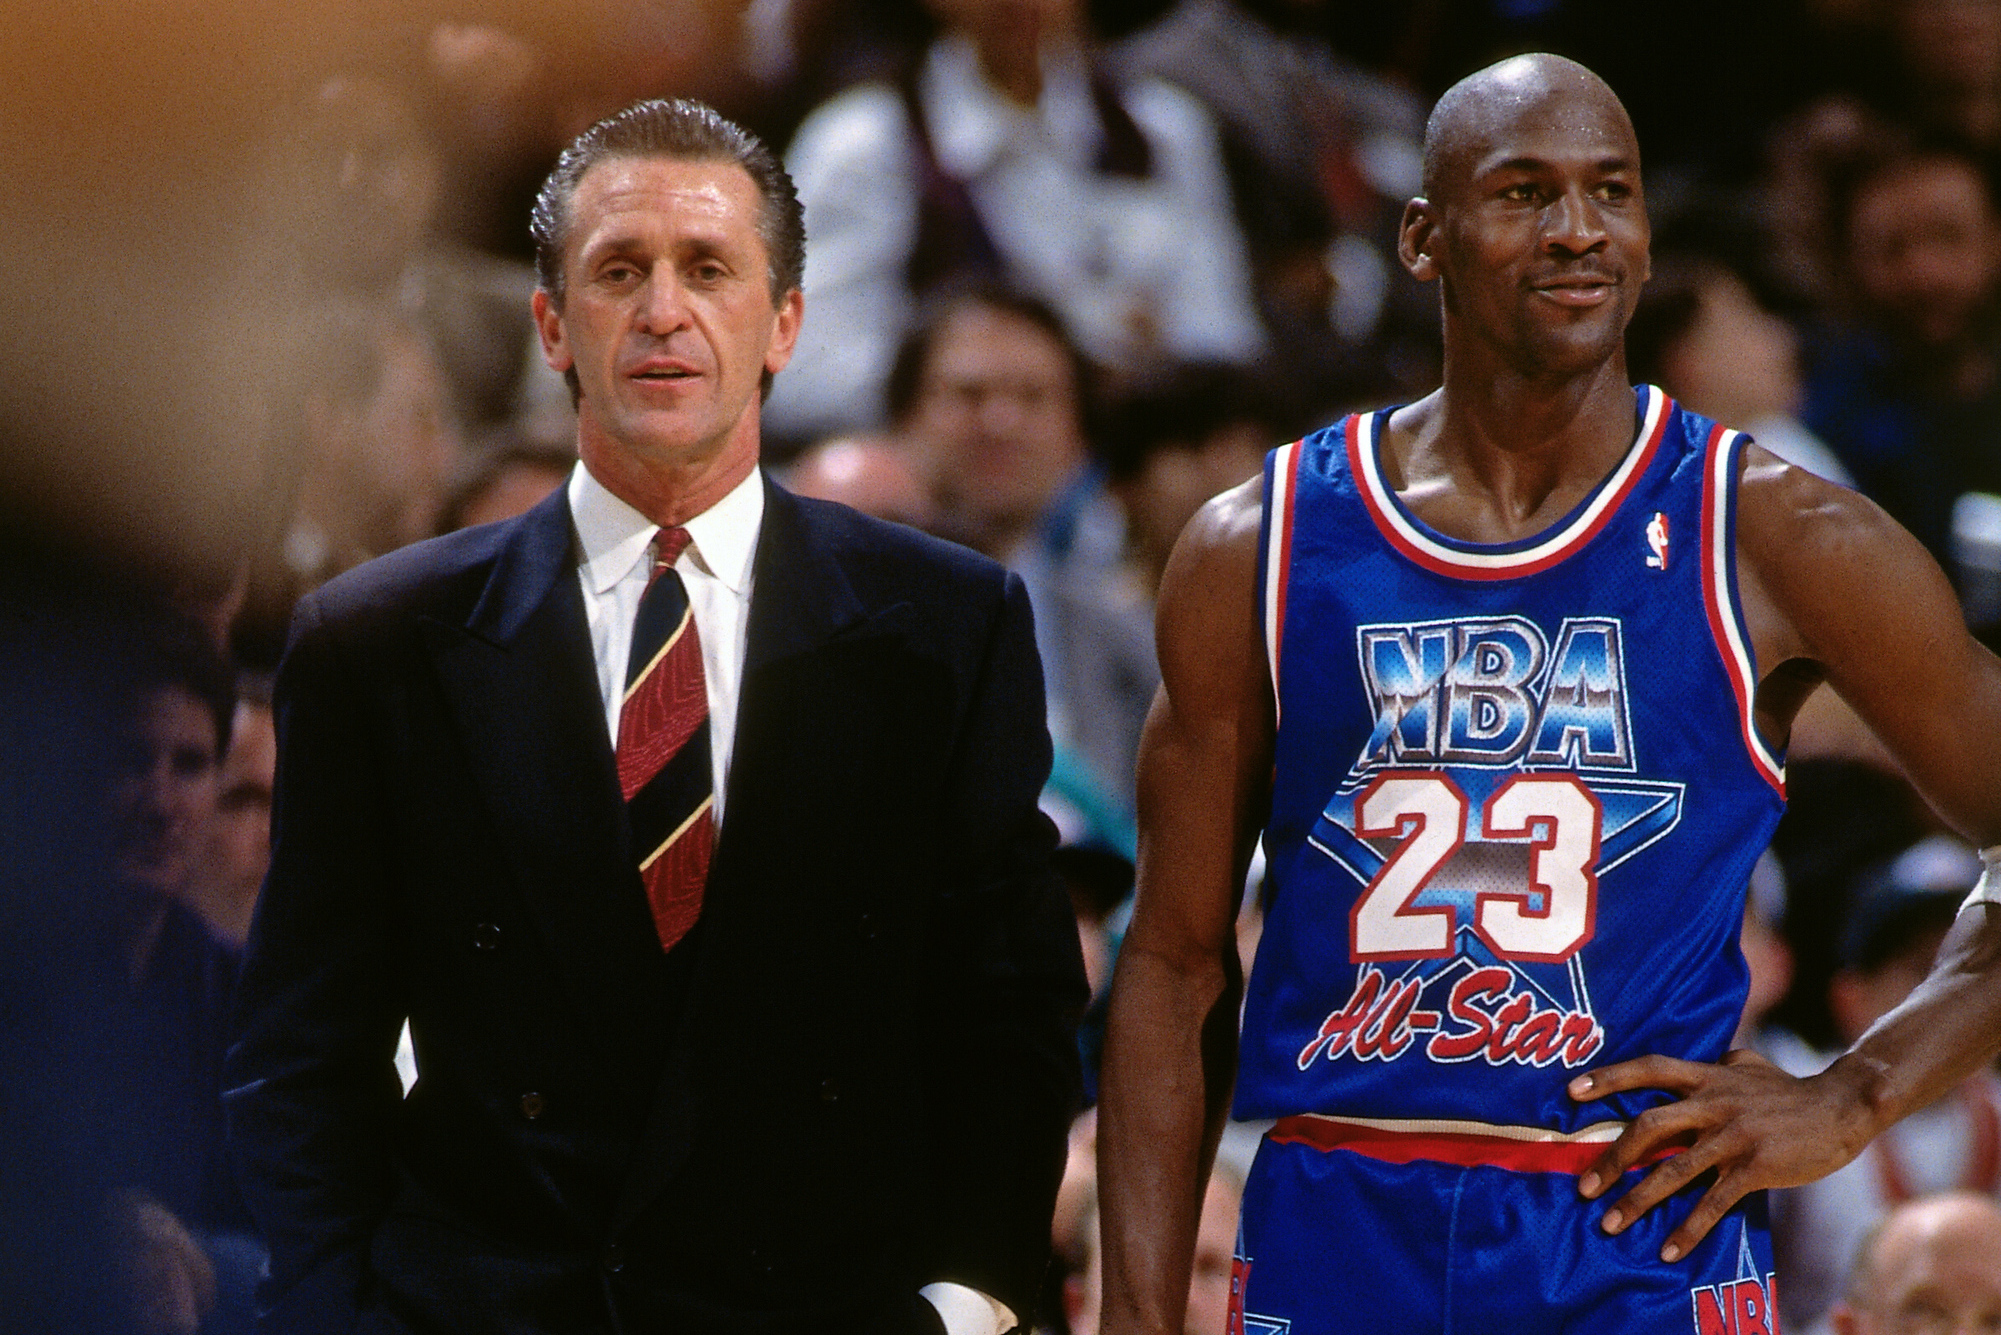 Pat Riley Told The Last Dance Michael Jordan Once Took His Hawaii Hotel Suite Bleacher Report Latest News Videos And Highlights